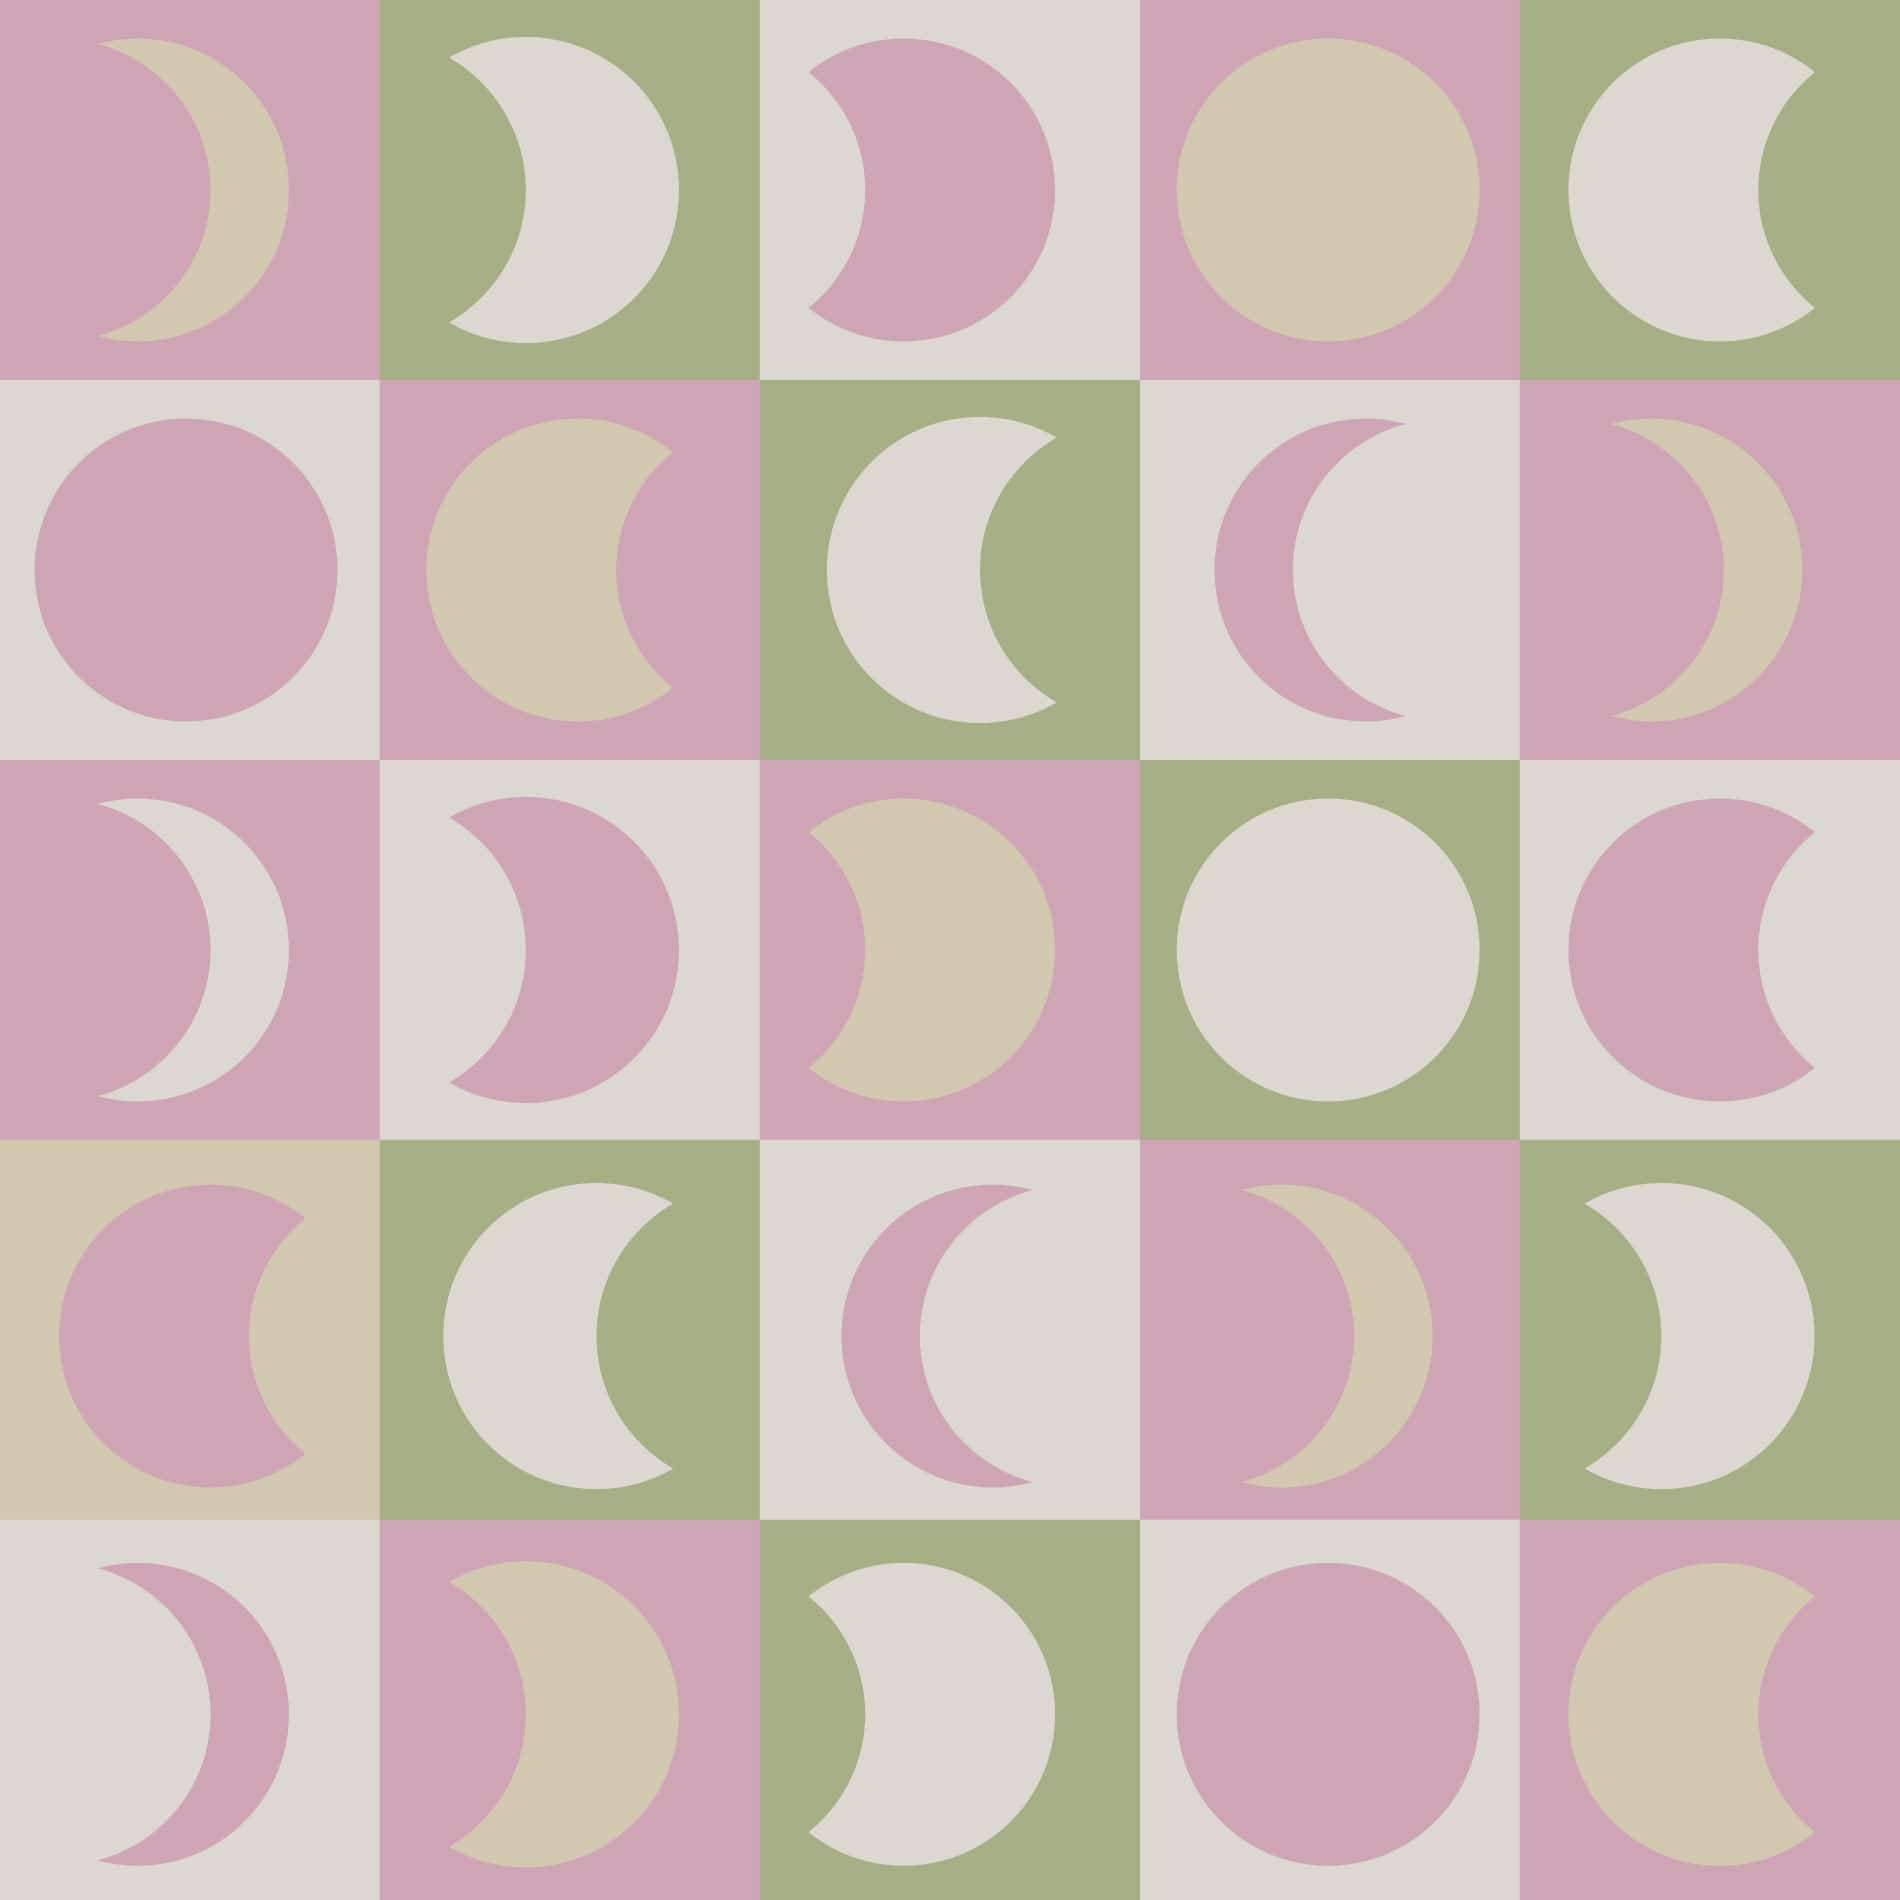 A pattern of circles and squares in pink, green - Moon phases